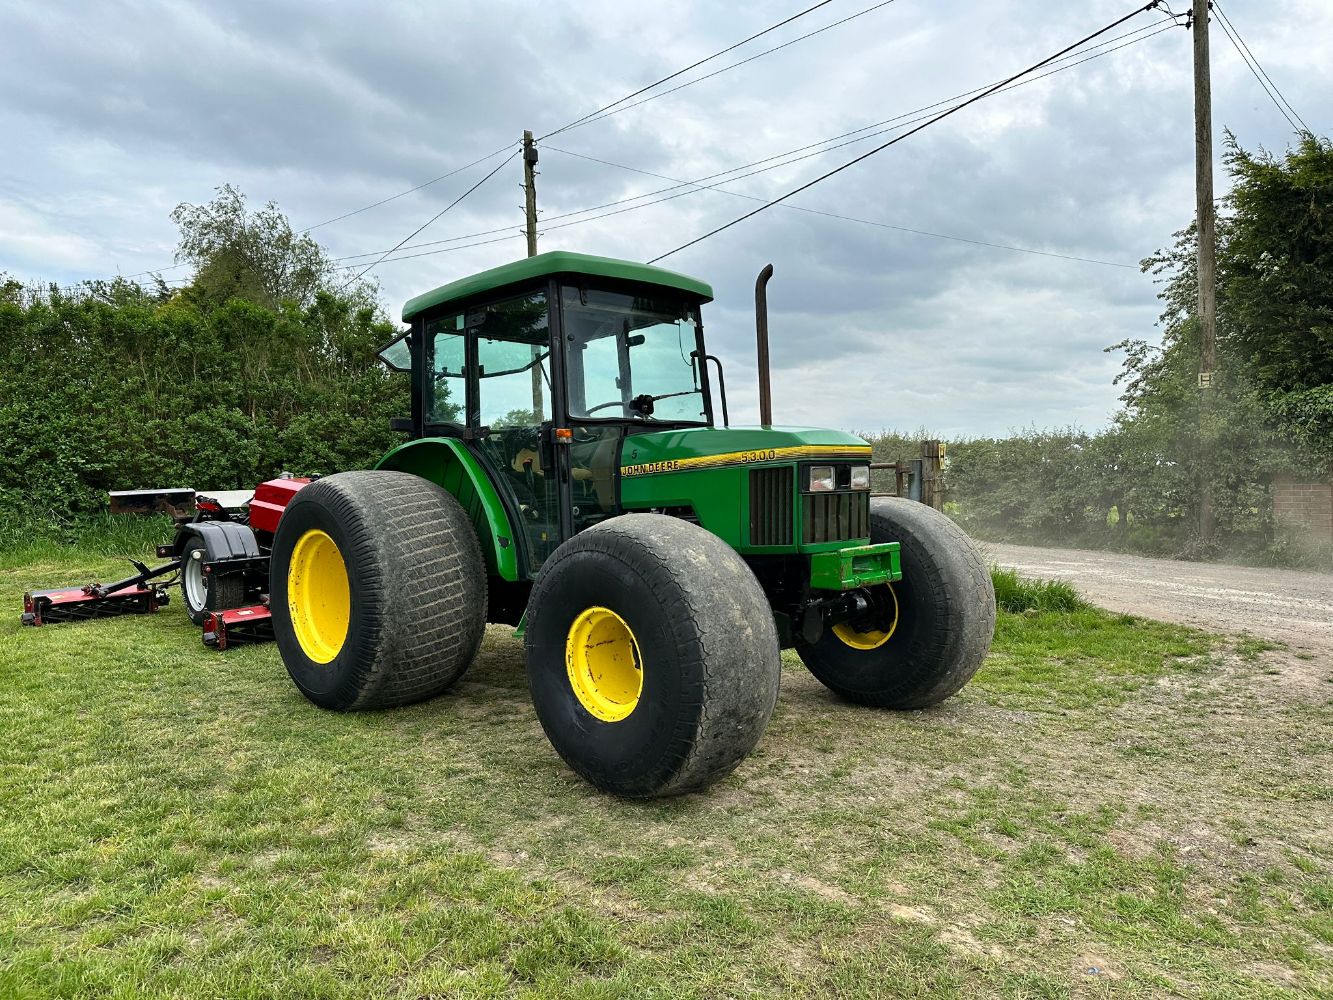 SUNDAY 6PM! JOHN DEERE 5300 4WD TRACTOR, MANITOU, TEREX, BOMAG, PLYMOUTH PROWLER, EV VEHICLES, TRACTORS, MOWERS, VANS & MUCH MORE!